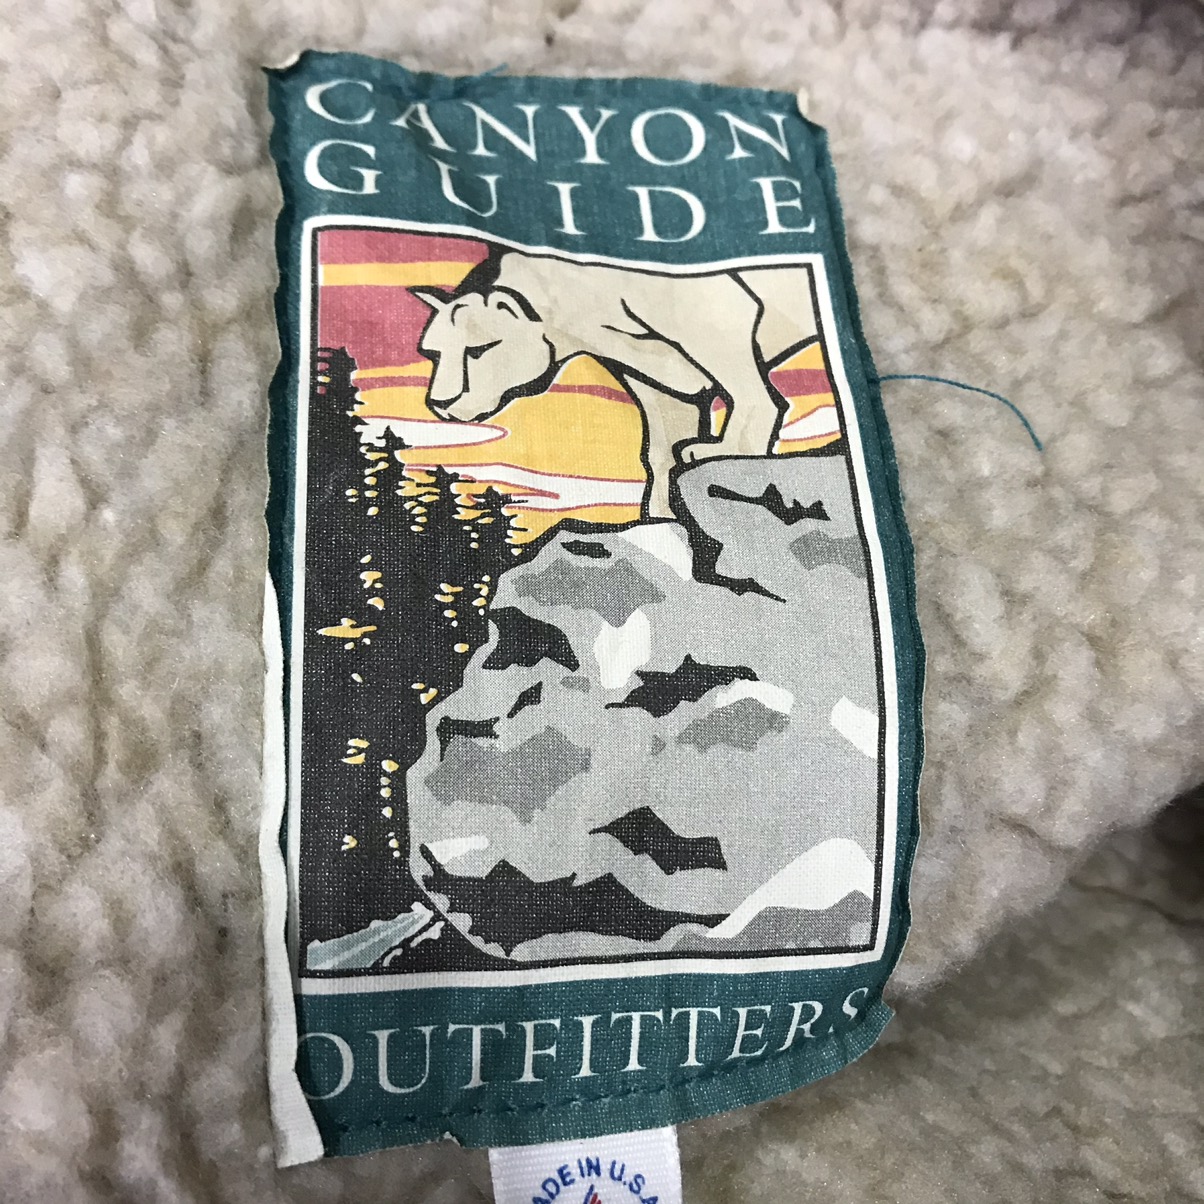 Vintage - Canyon Guide Outfitters Corduroy Jackets - 8